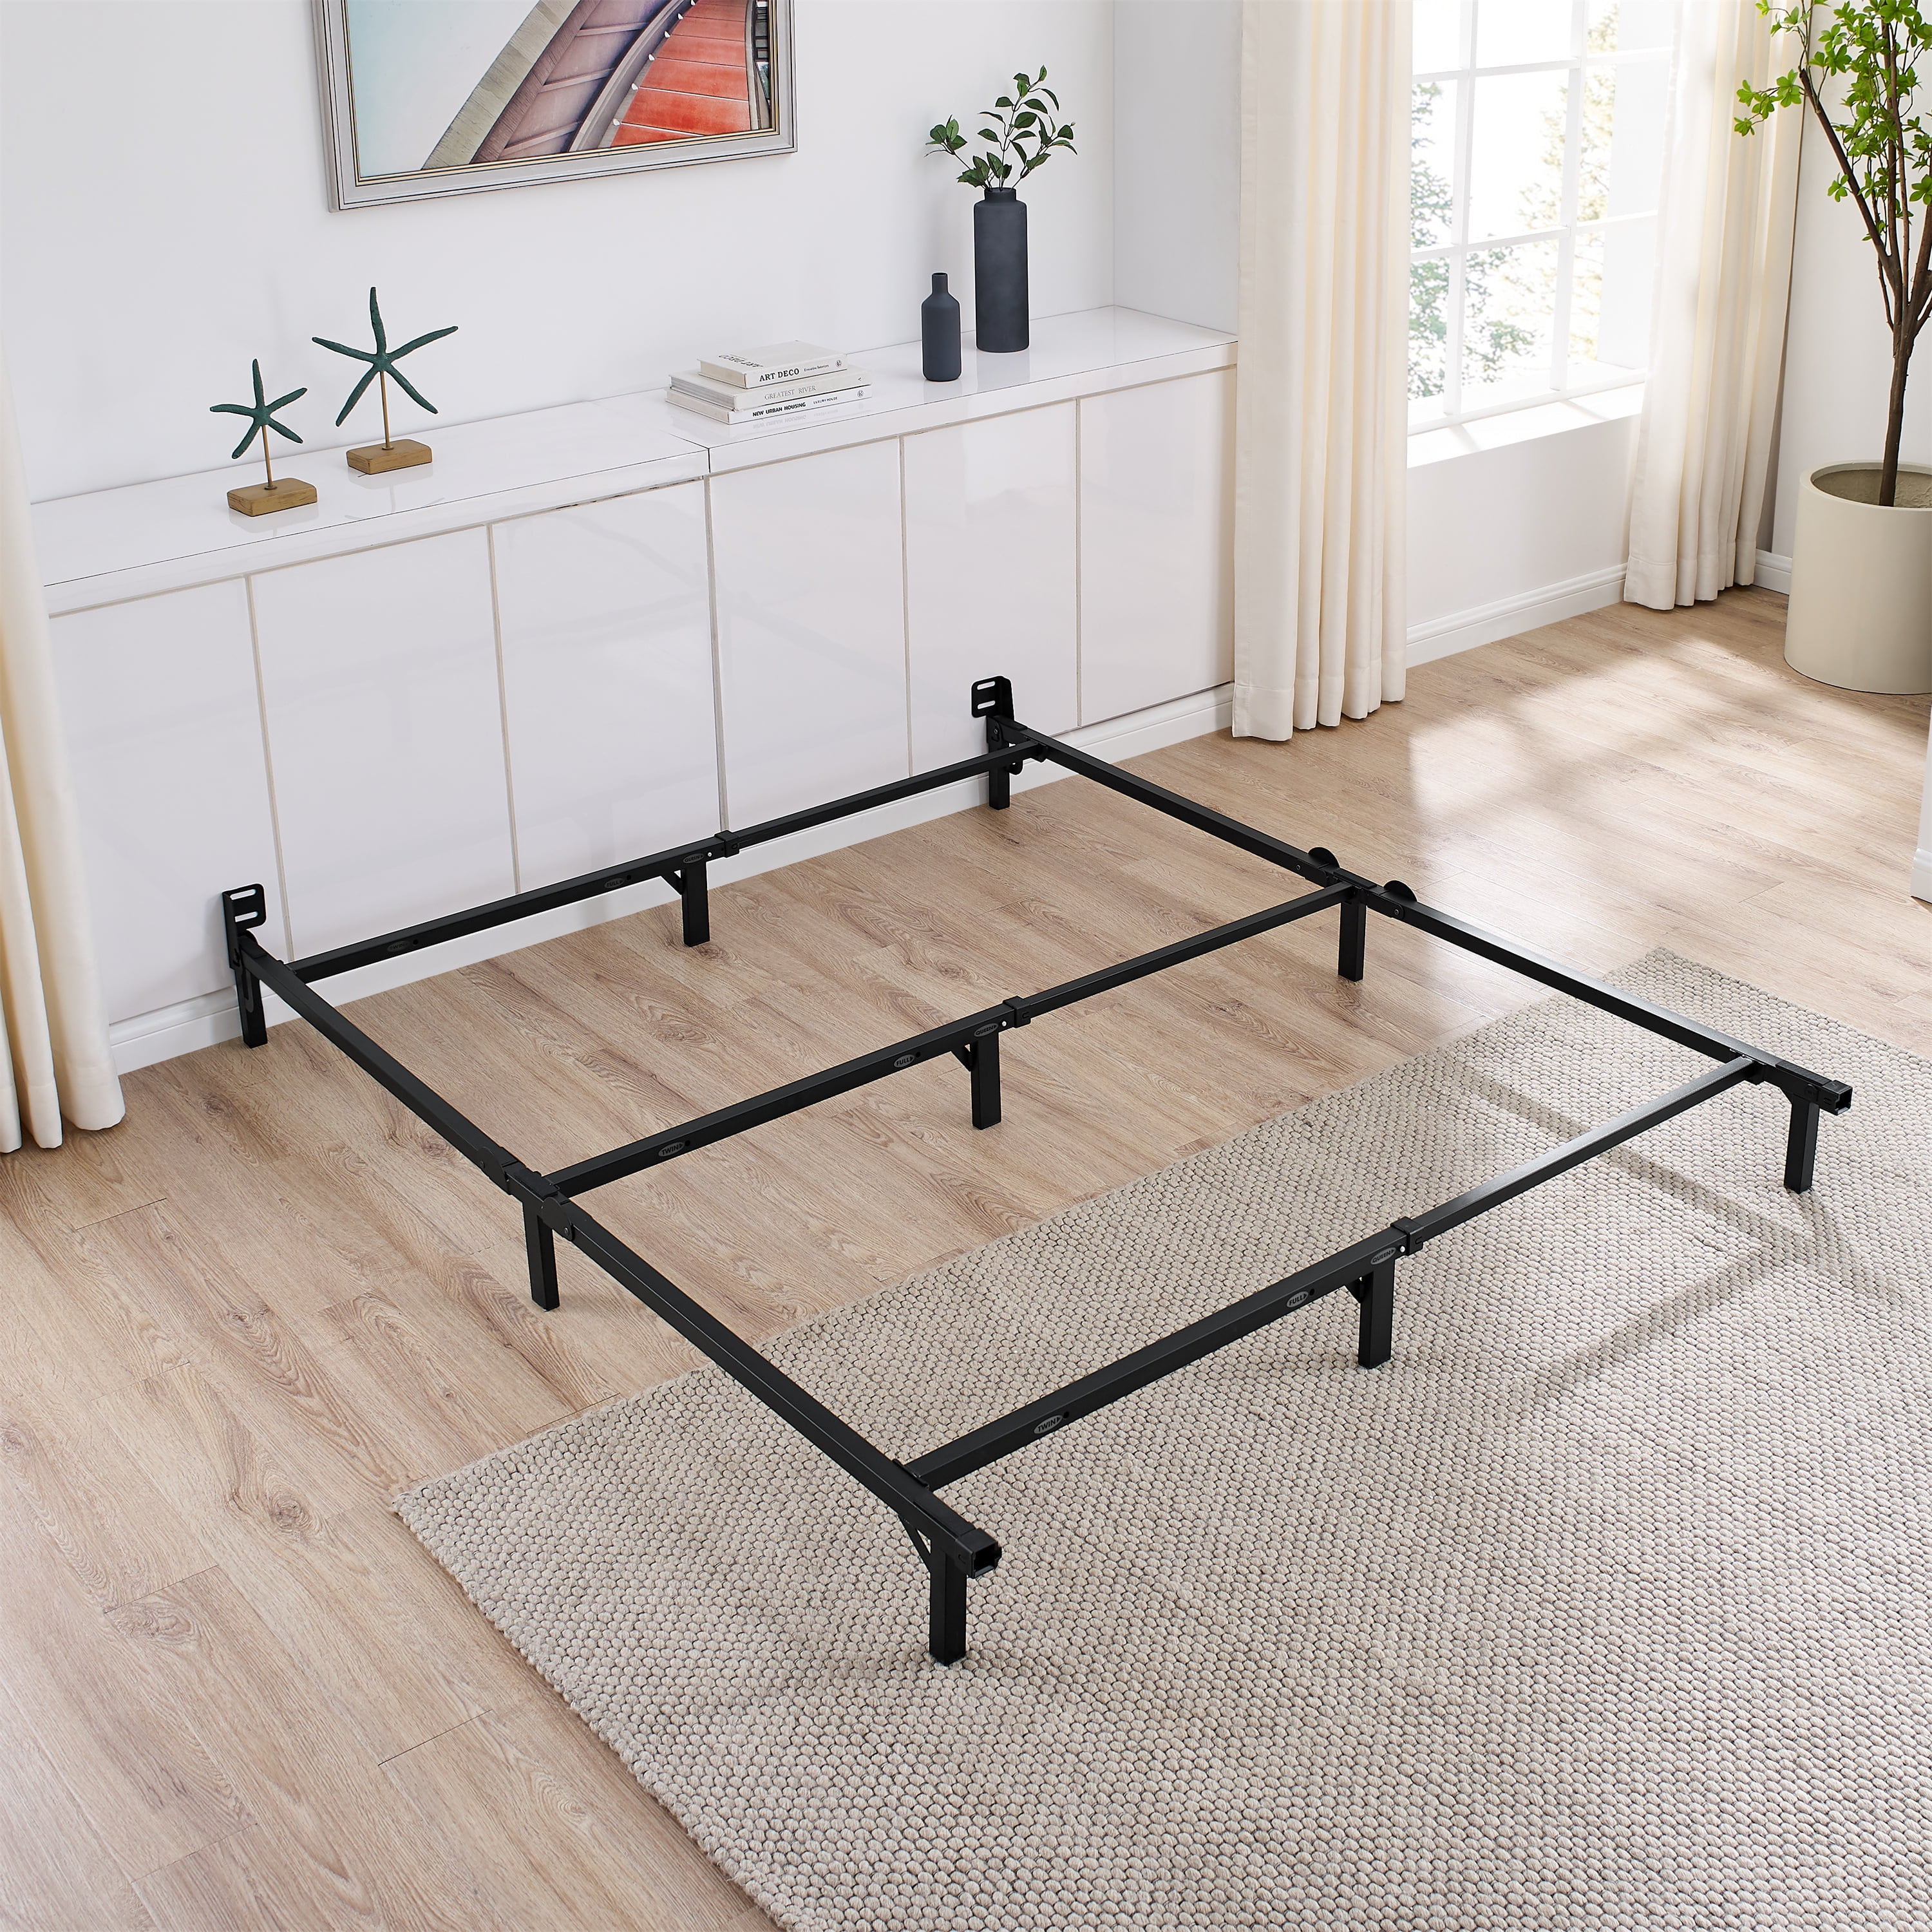 Details about   Mainstays 7" Adjustable Bed Frame Black Steel Twin Queen Full King Size 